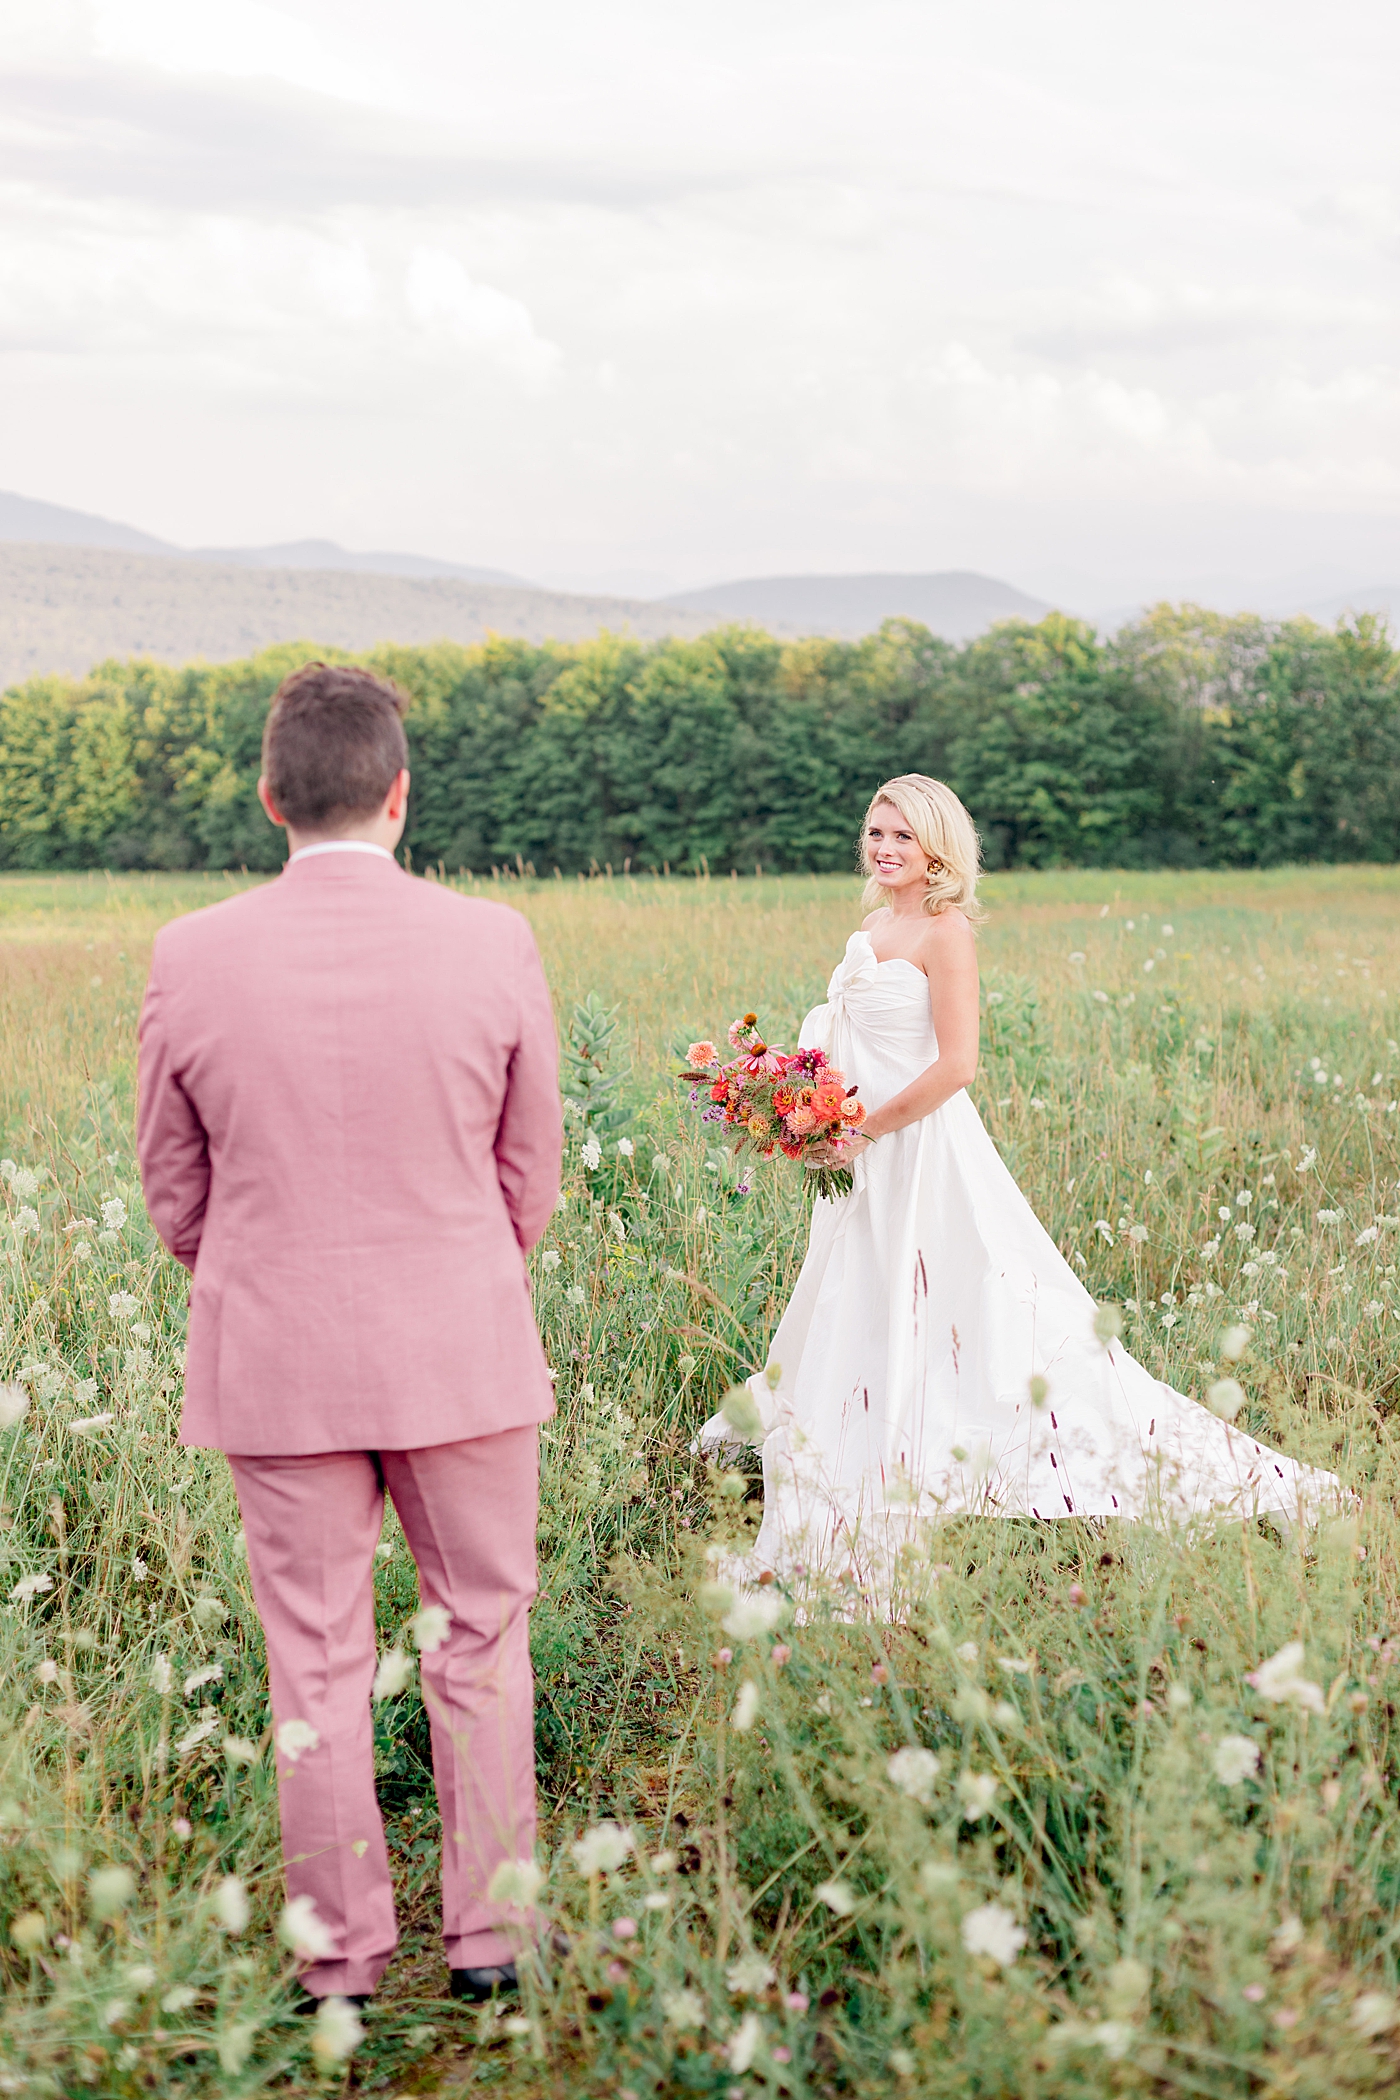 during Adirondack Mountain Elopement Weekend | Image by Hope Helmuth Photography